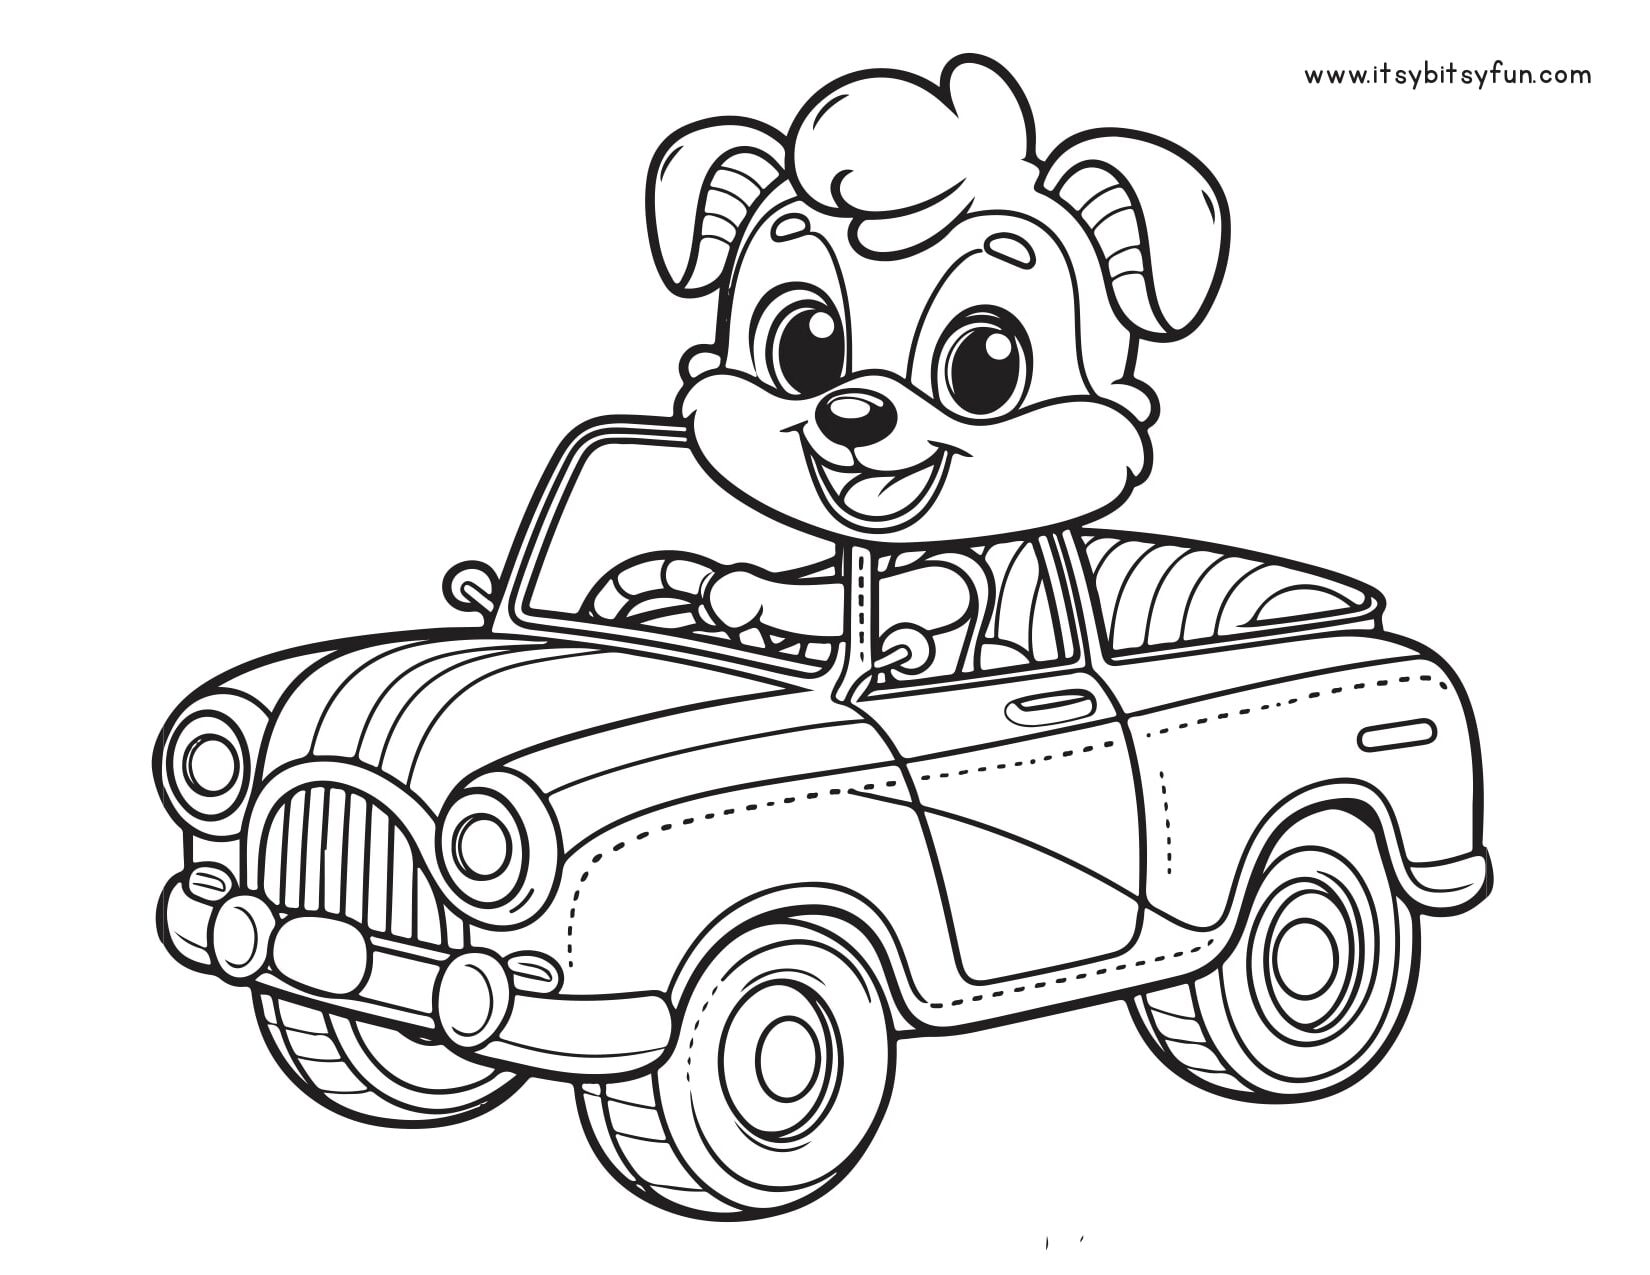 Dog driving a car illustration to color.